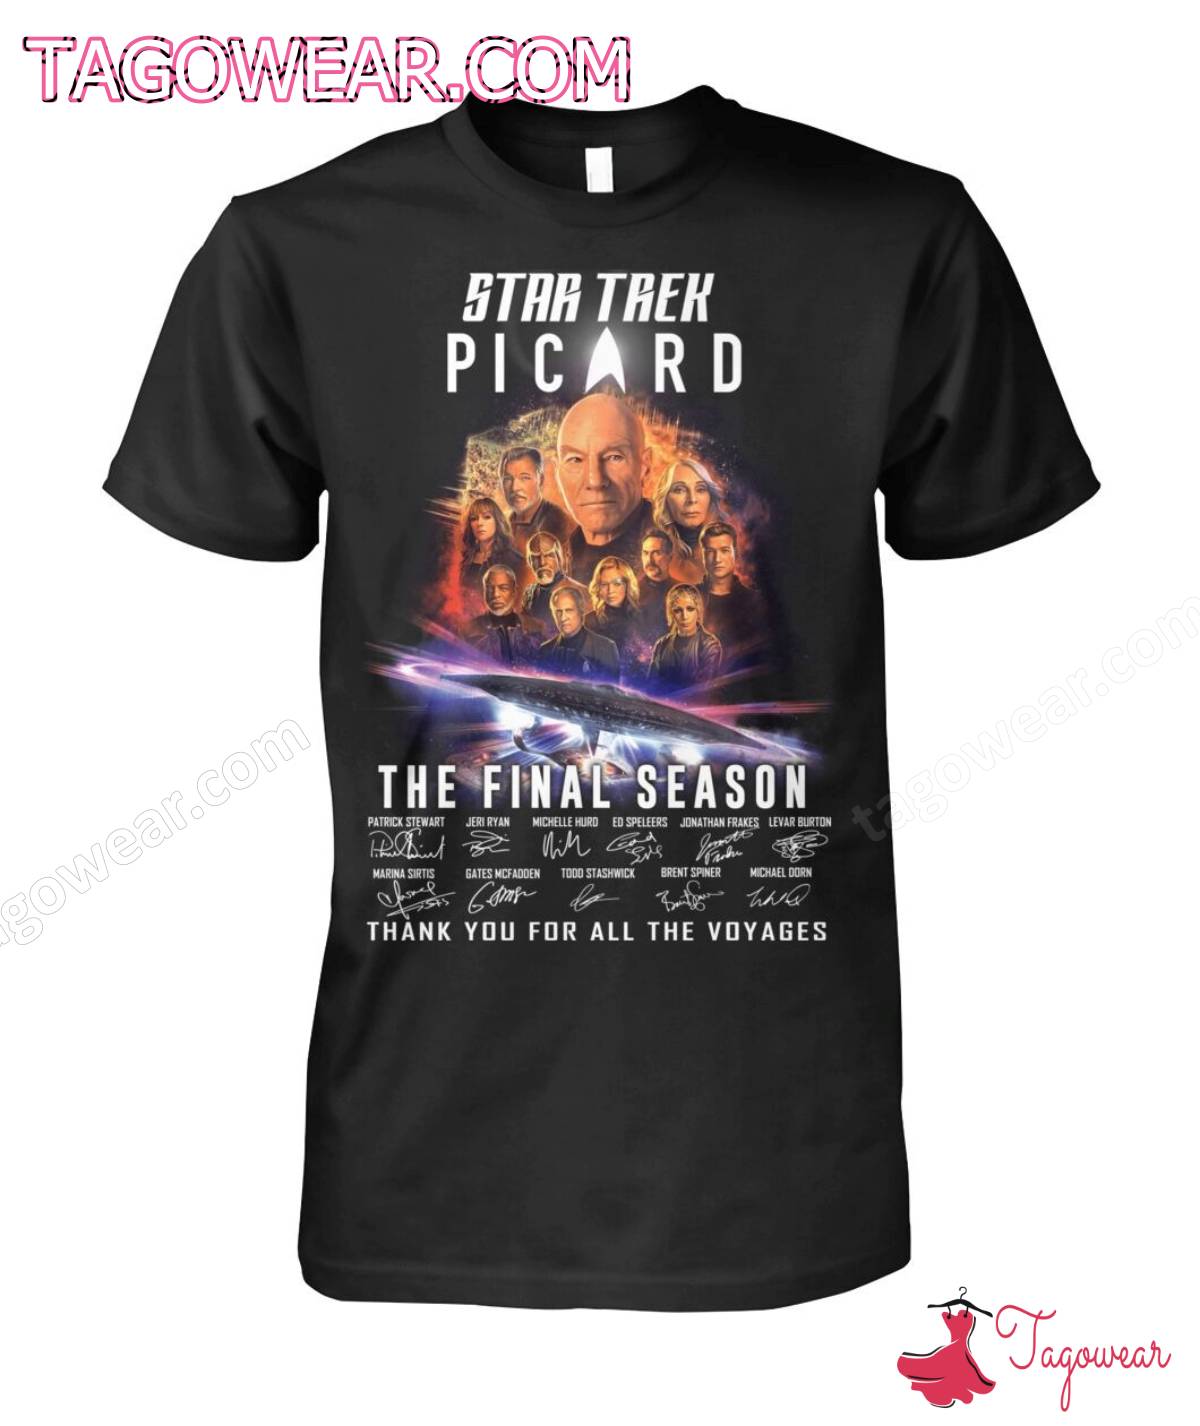 Star Trek Picard The Final Season Signatures Thank You For All The Voyages Shirt, Tank Top